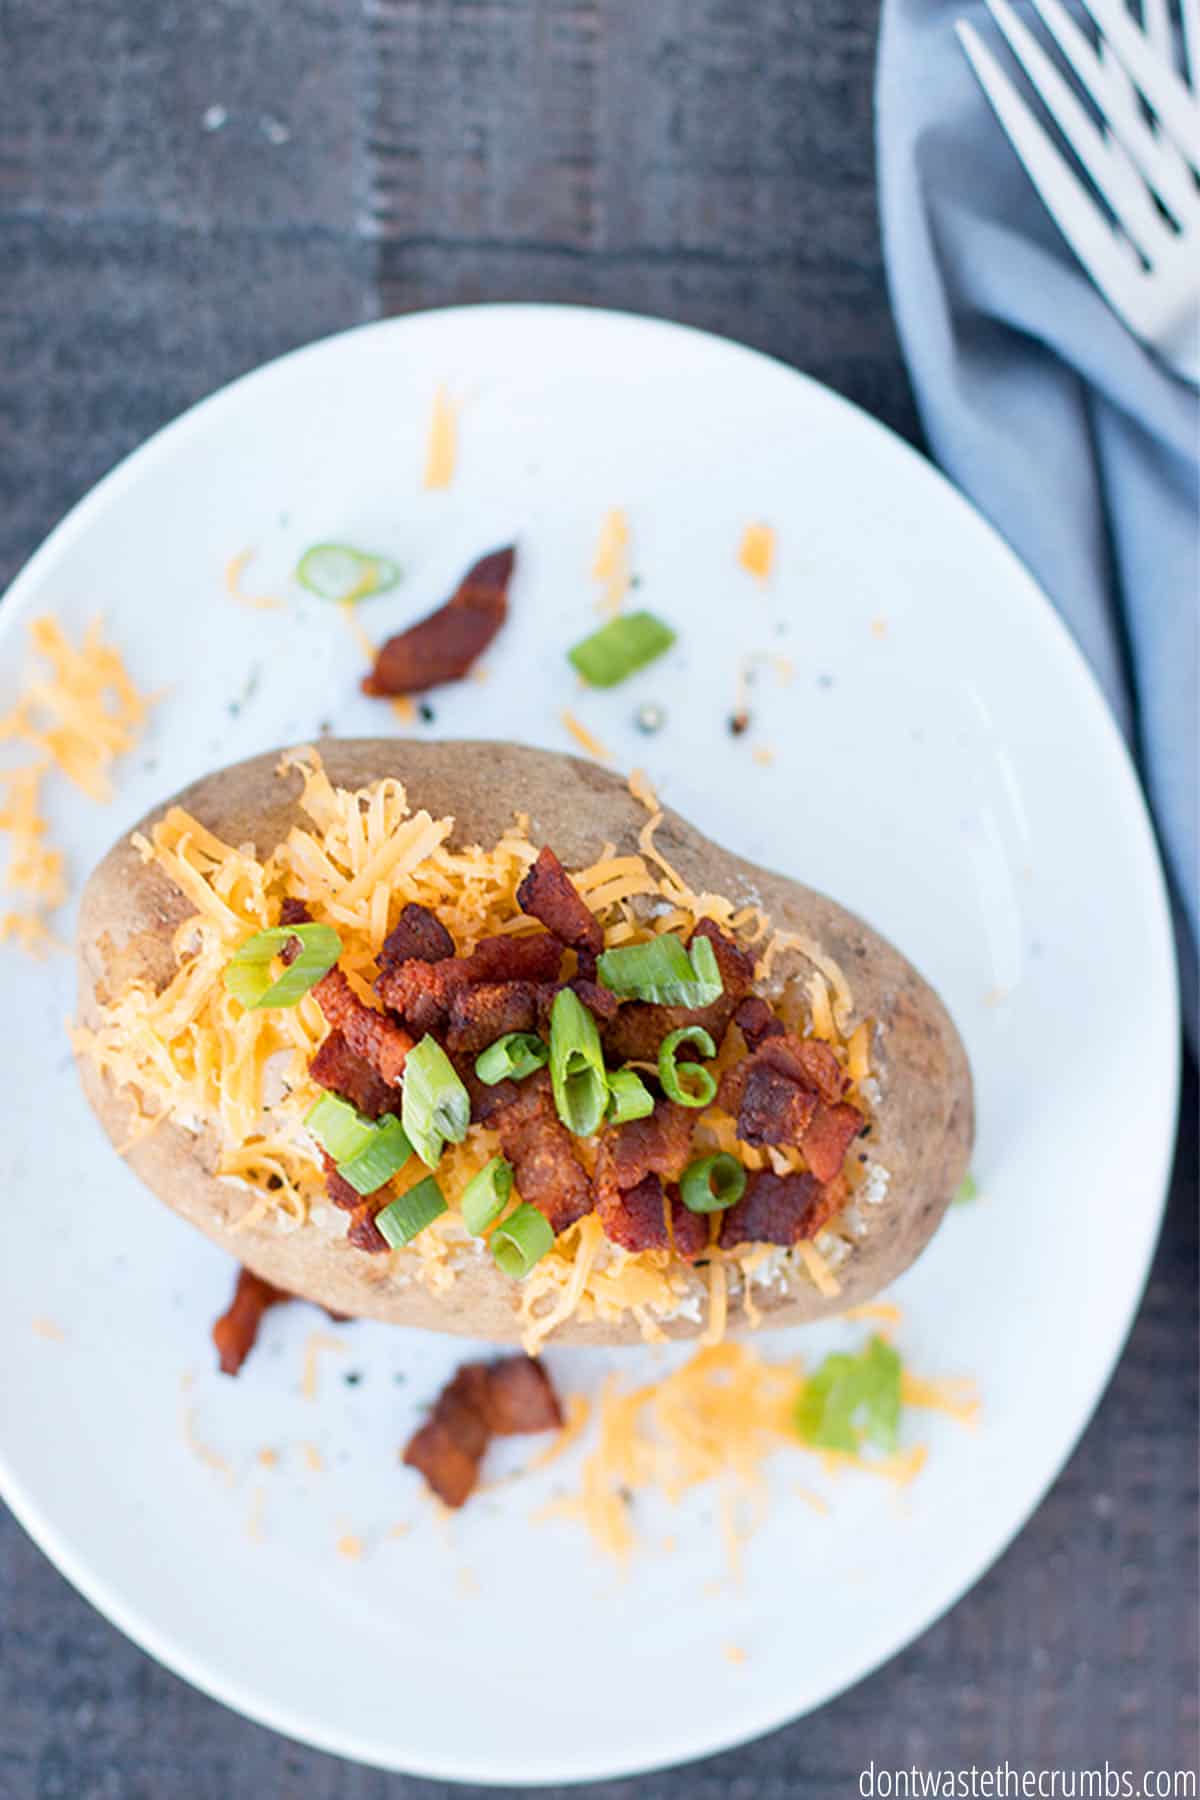 A loaded baked potato on a white plate.